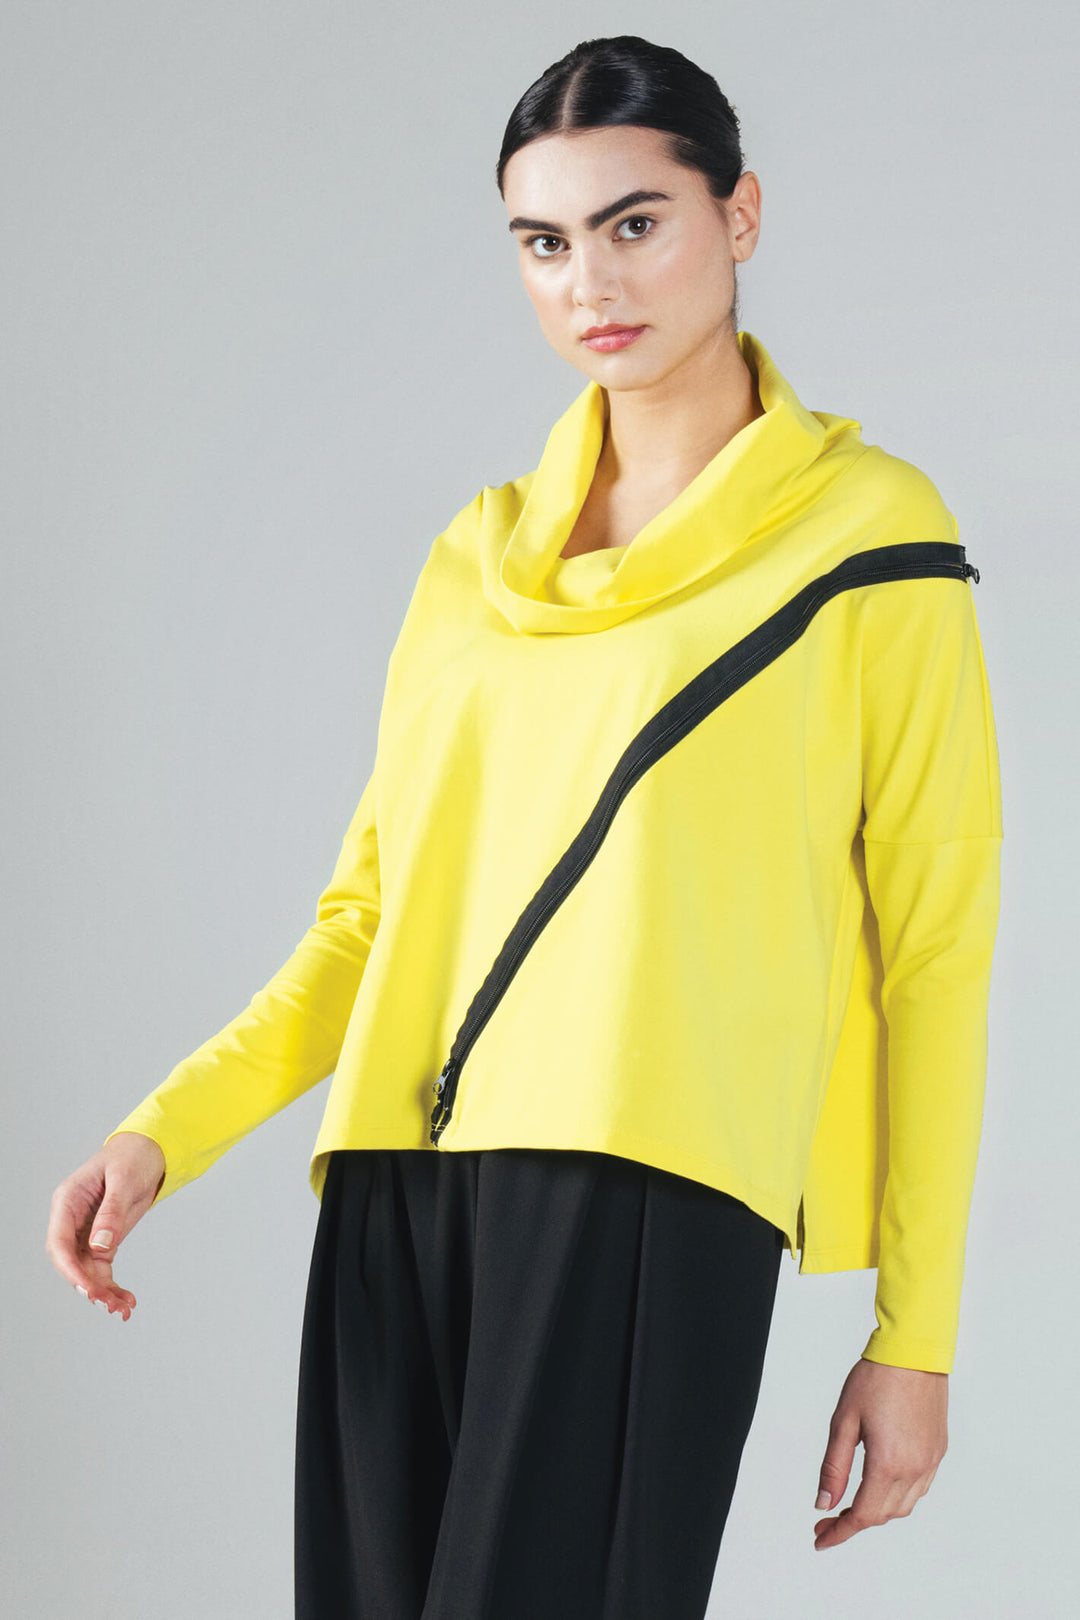 Igor W23-35 Finland Yellow Cowl Neck Oversized Zip Detail Top - Expeirence Boutique